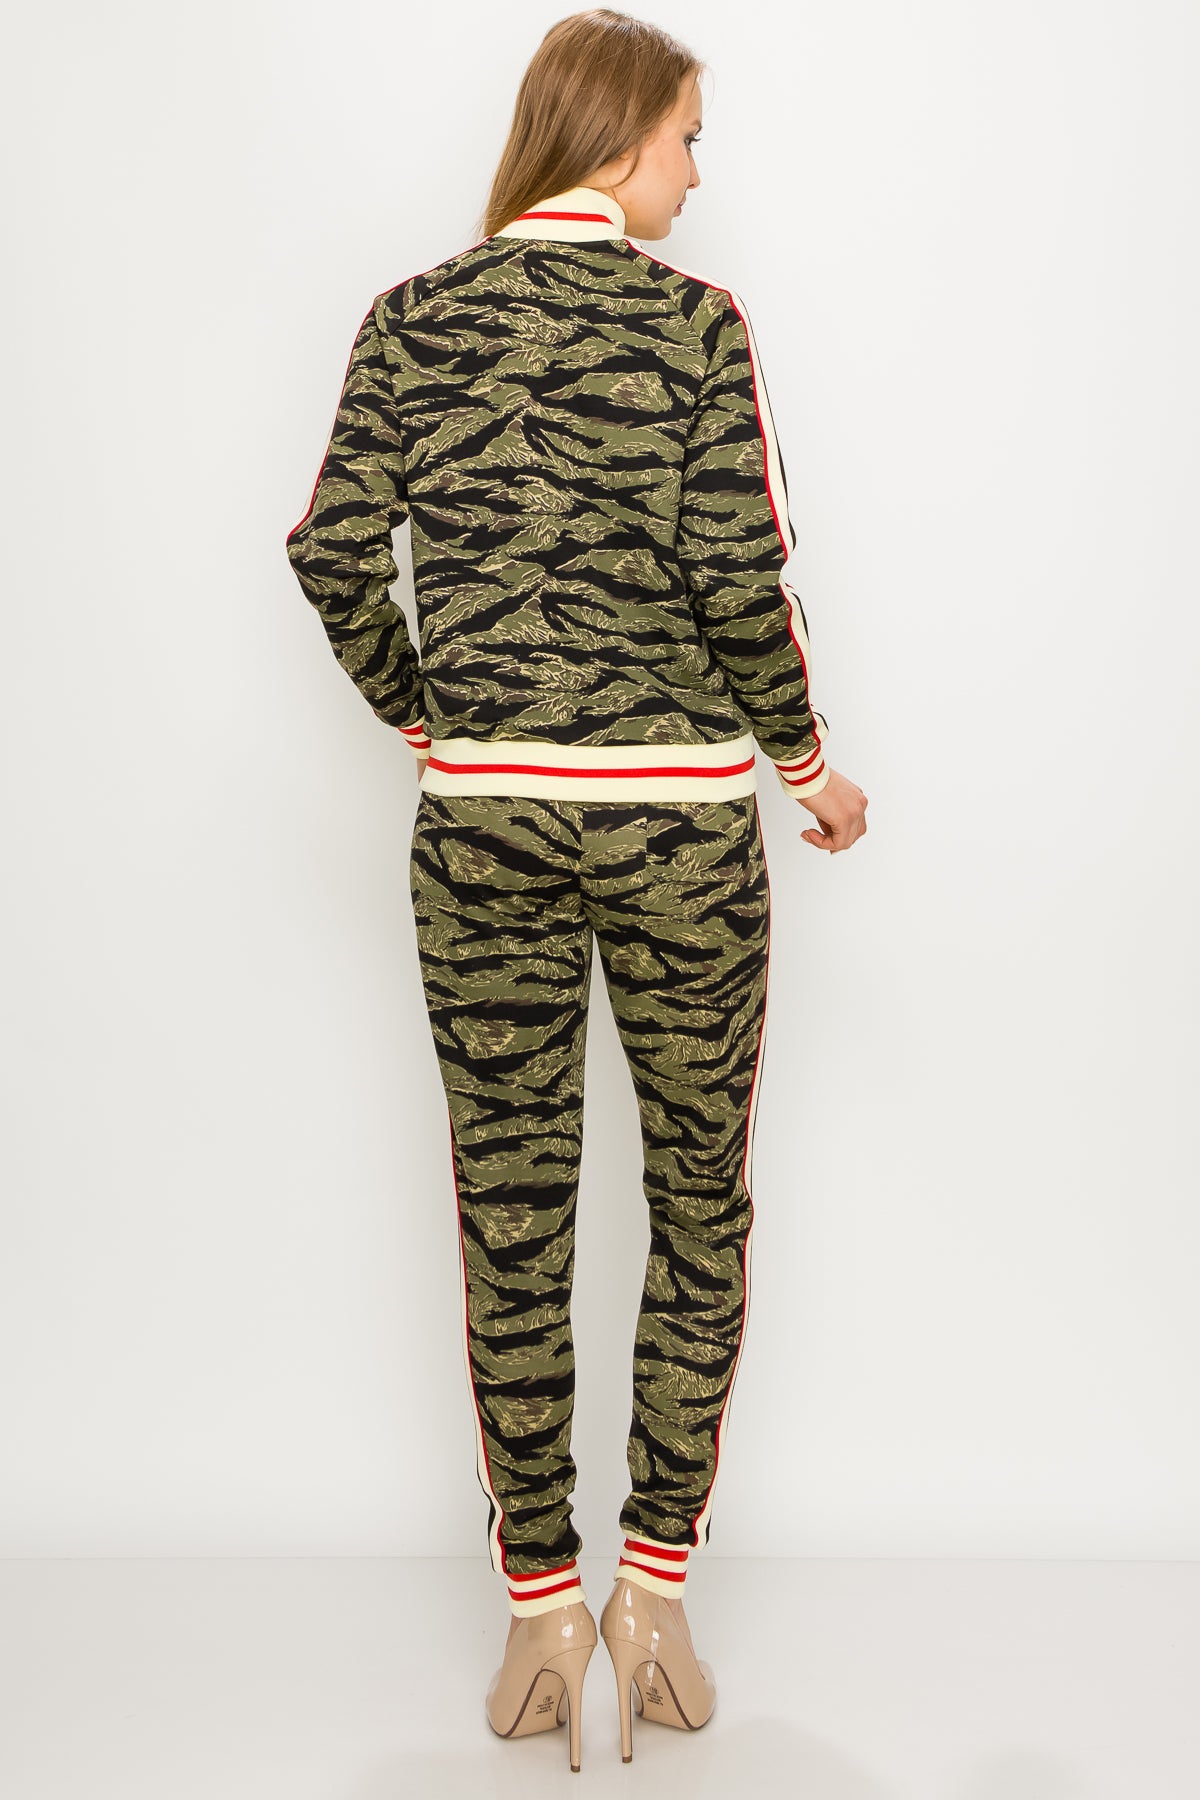 Women's tiger camo track suits